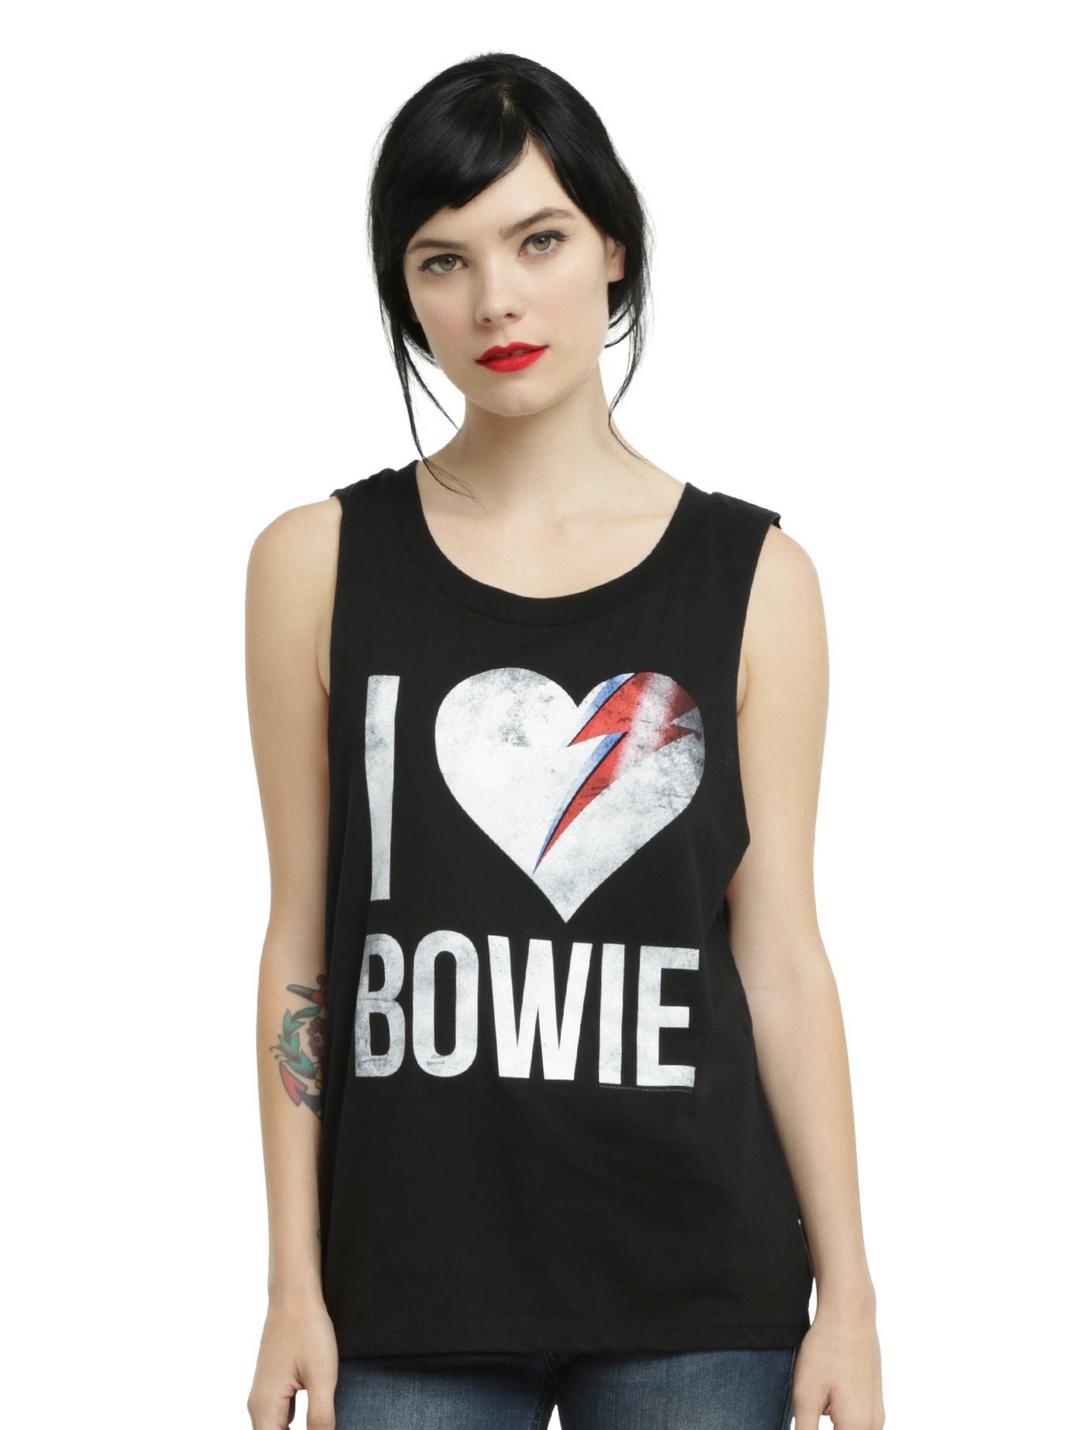 David Bowie I Heart Bowie Girls Muscle Top, BLACK, hi-res